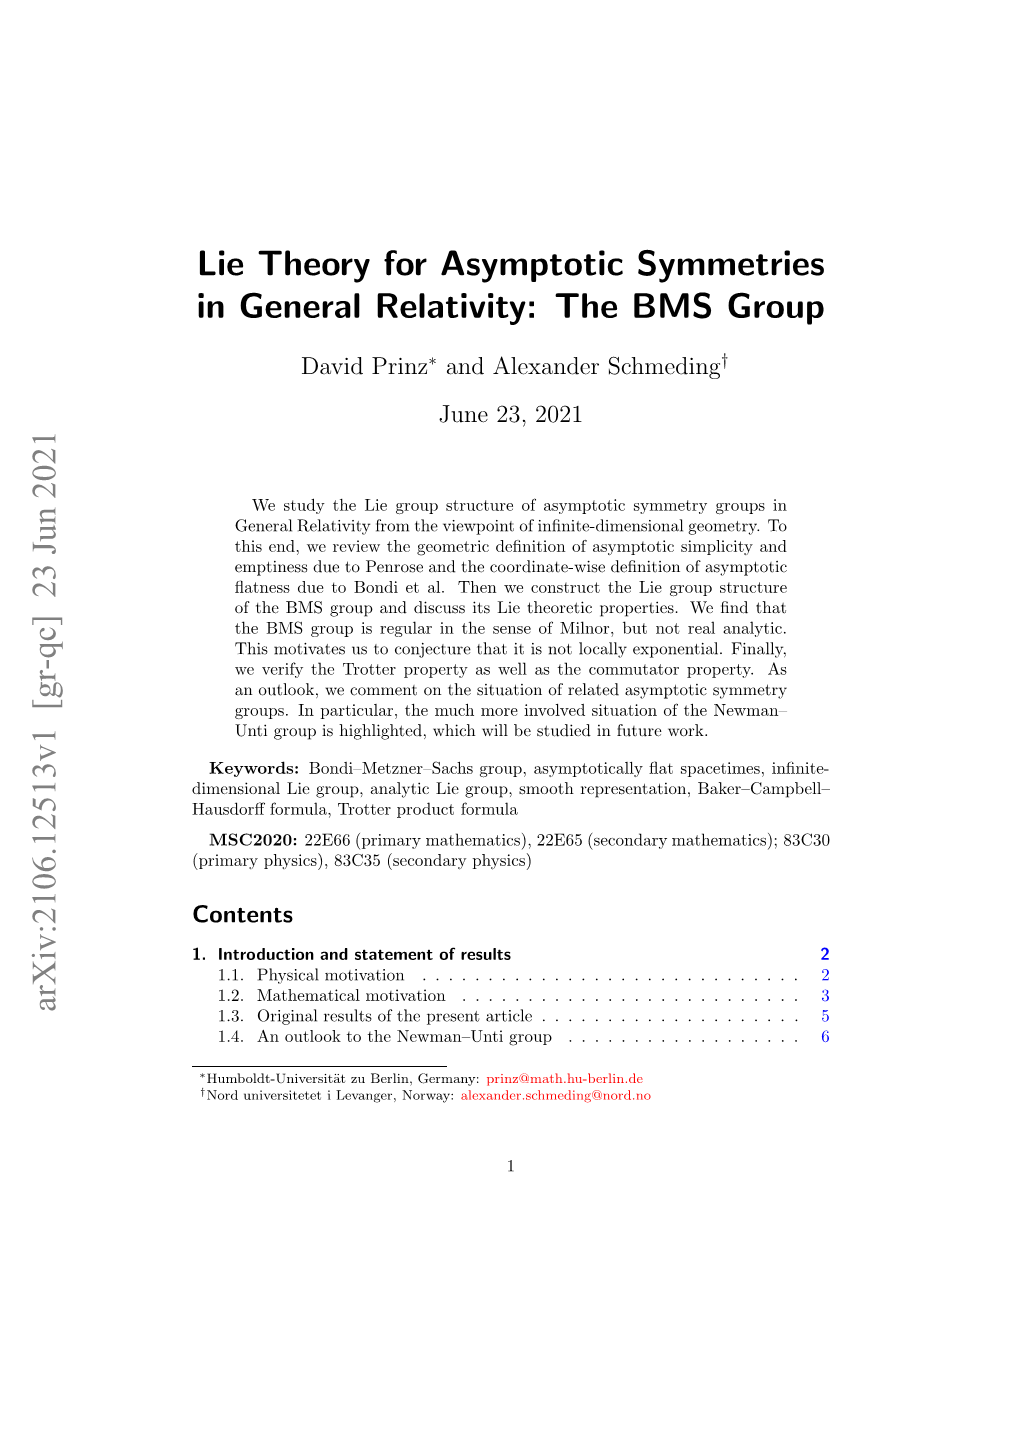 Lie Theory for Asymptotic Symmetries in General Relativity: the NU Group